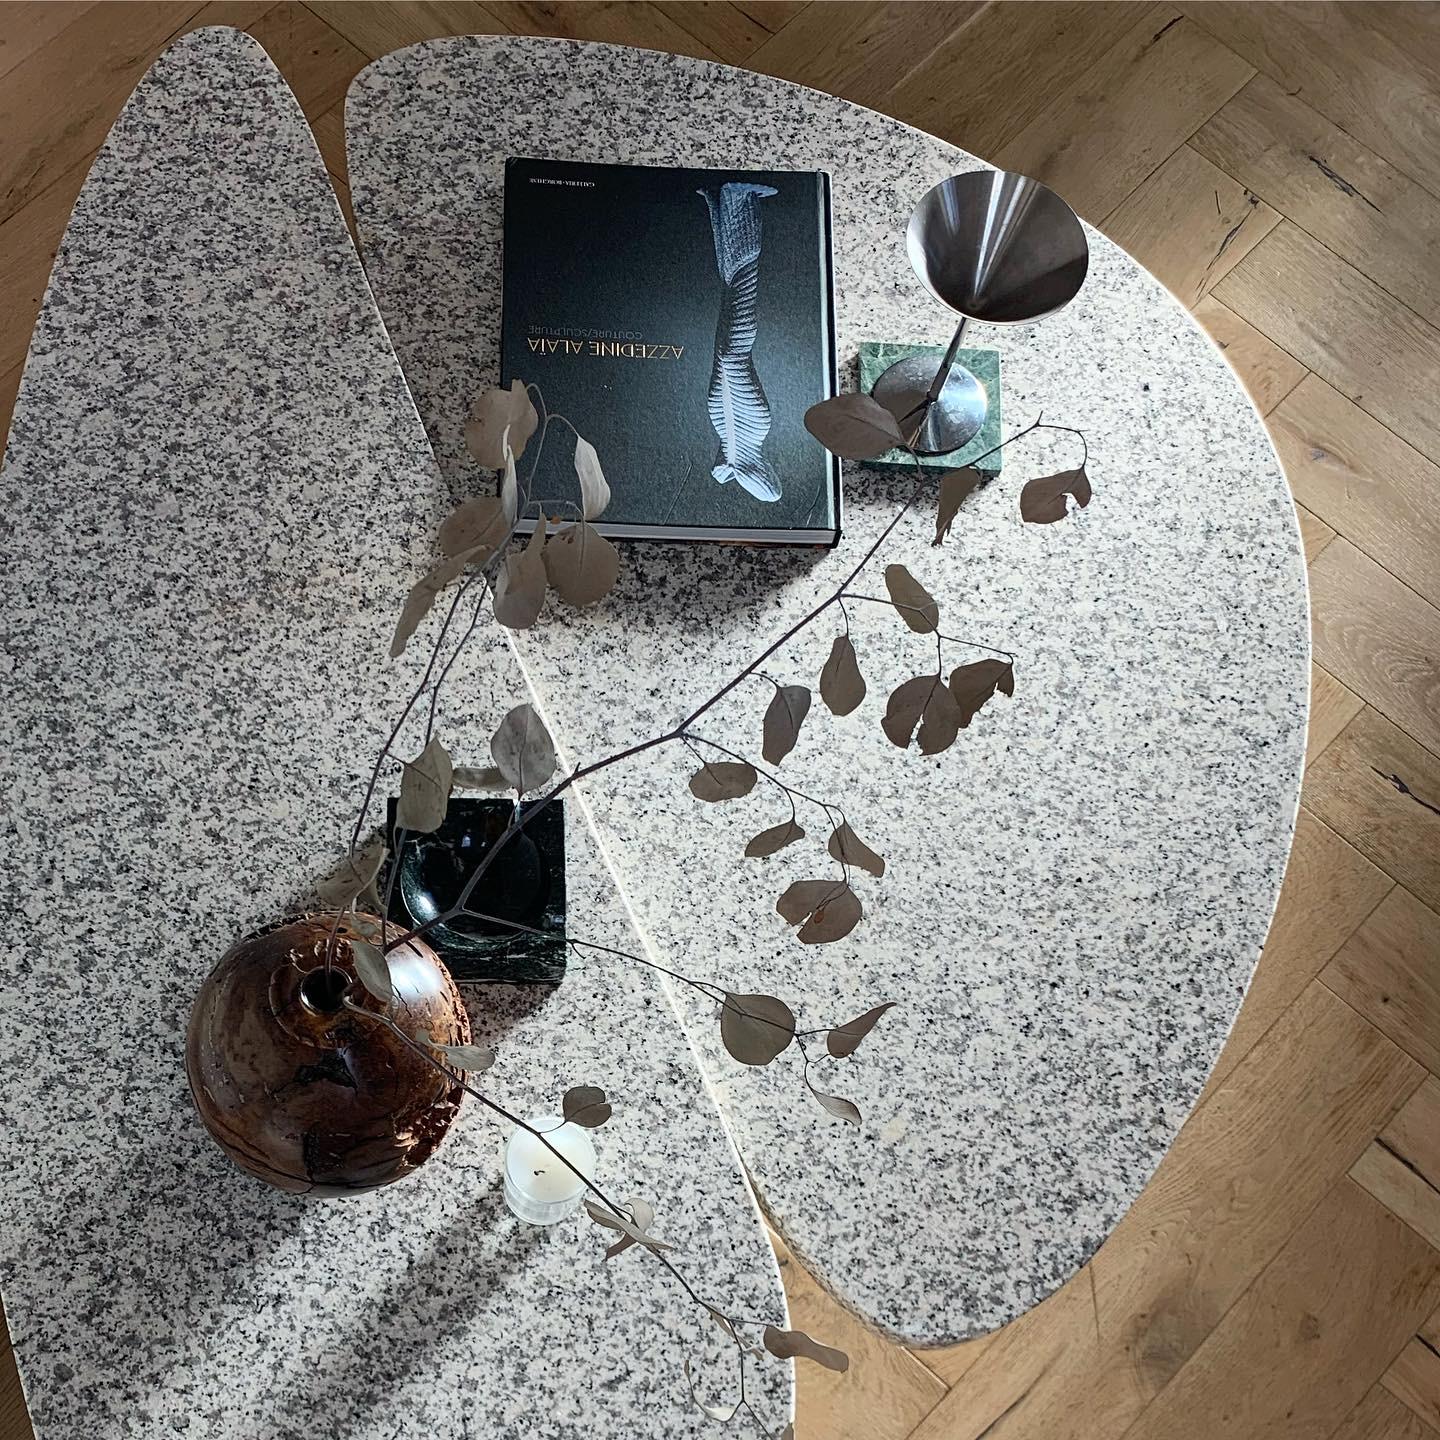 For the savvy collector: ultra rare 1970s architectural granite coffee table by Willy Ballez, circa 1975. Ballez was a Belgium designer/artist who crafted exquisite postmodern marble furnitures throughout the 1970s. His petal pieces, carved out of